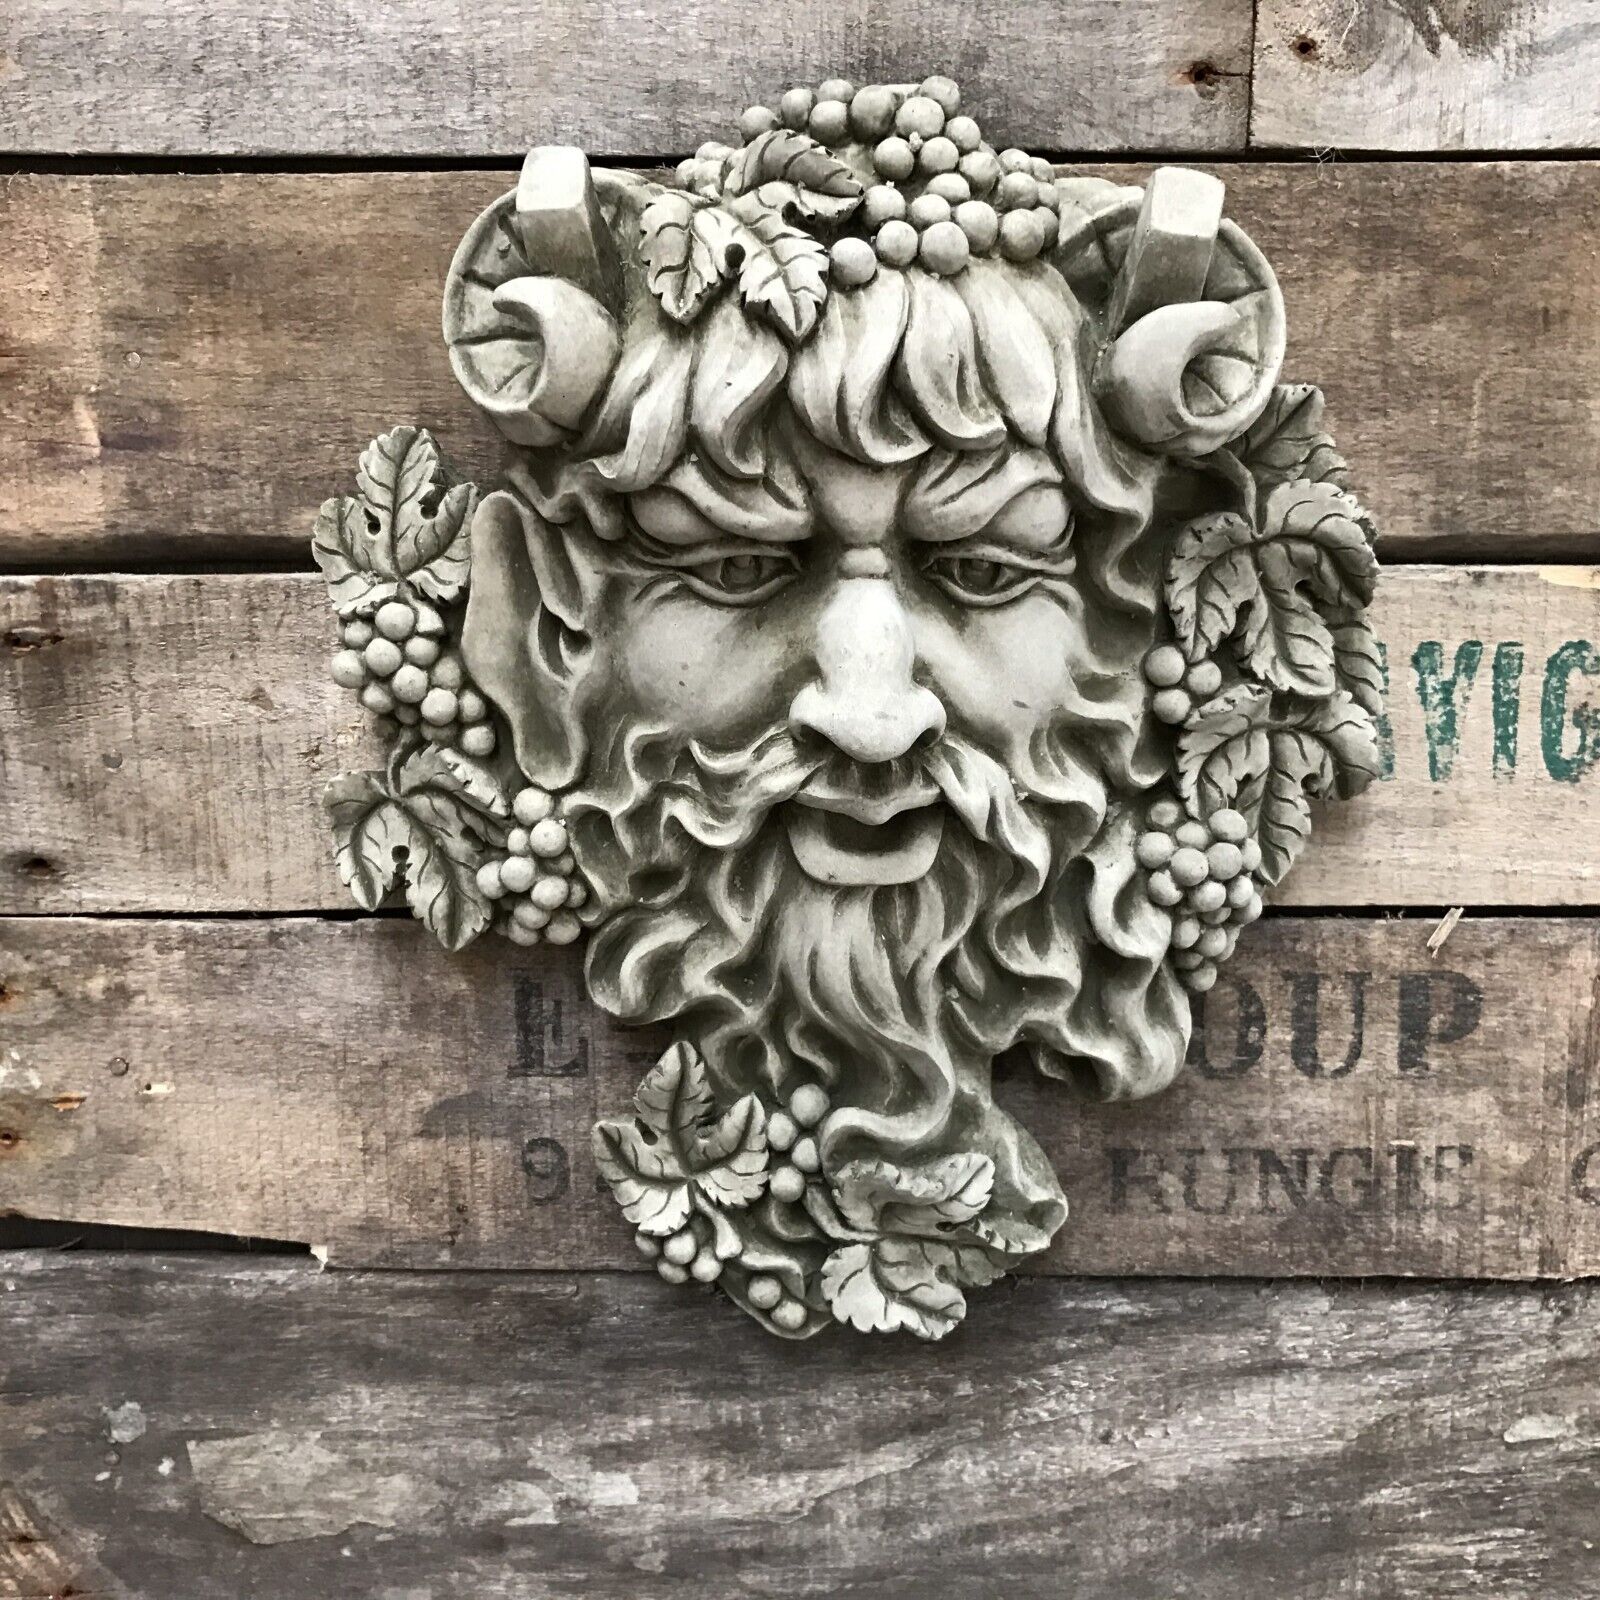 An ancient face with curled horns, large ears and flowing beard intwined with leaves and berries.